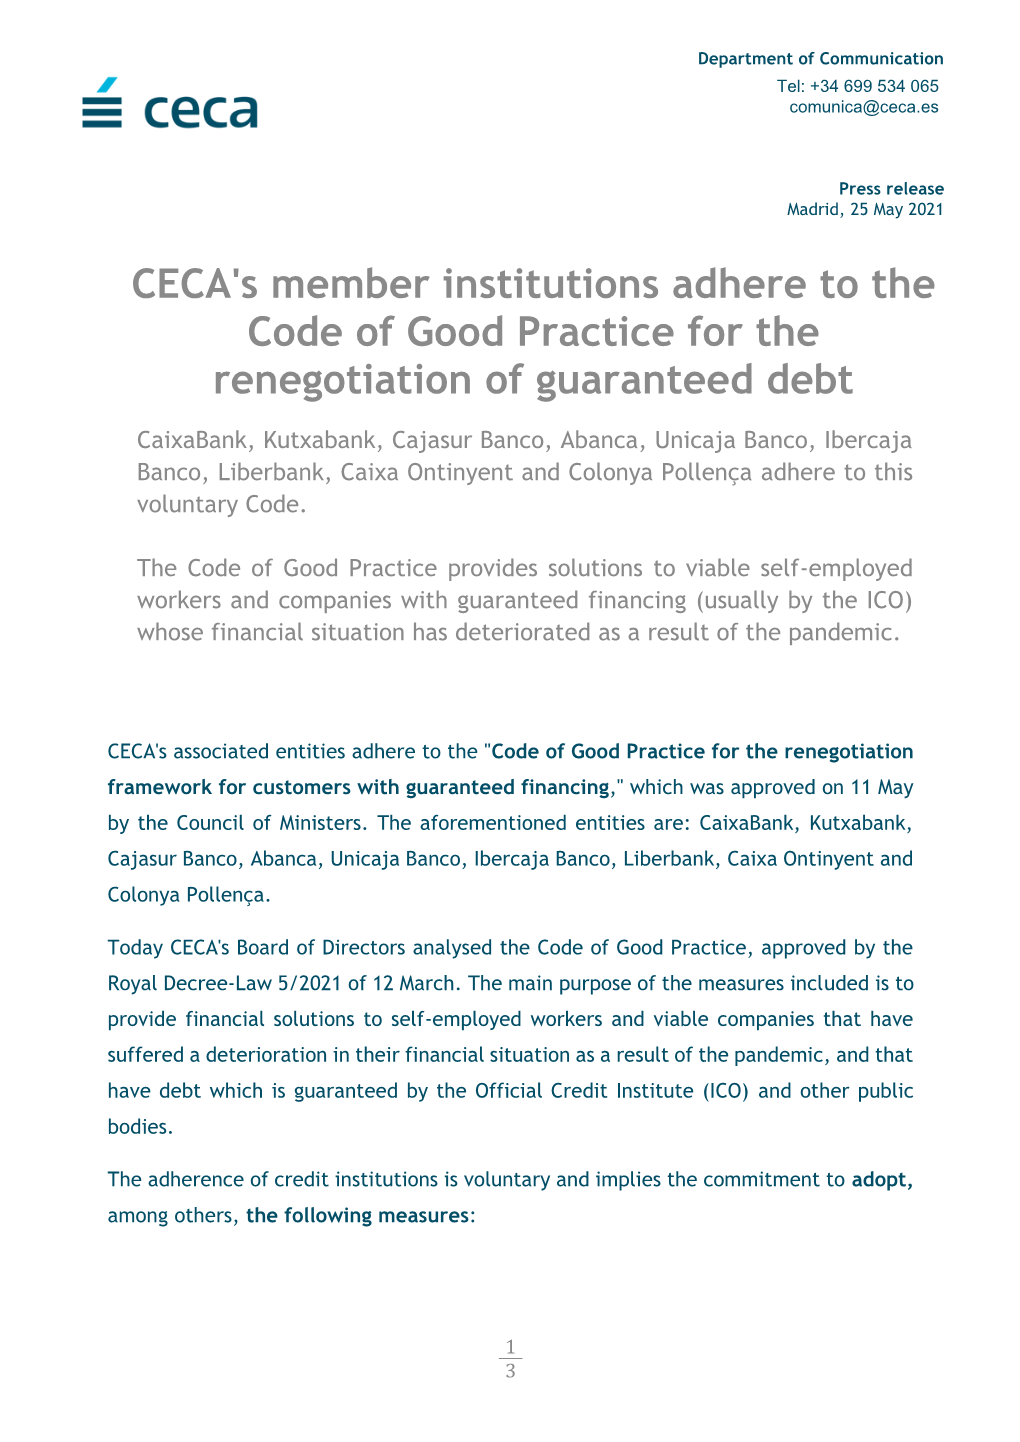 CECA's Member Institutions Adhere to the Code of Good Practice for The